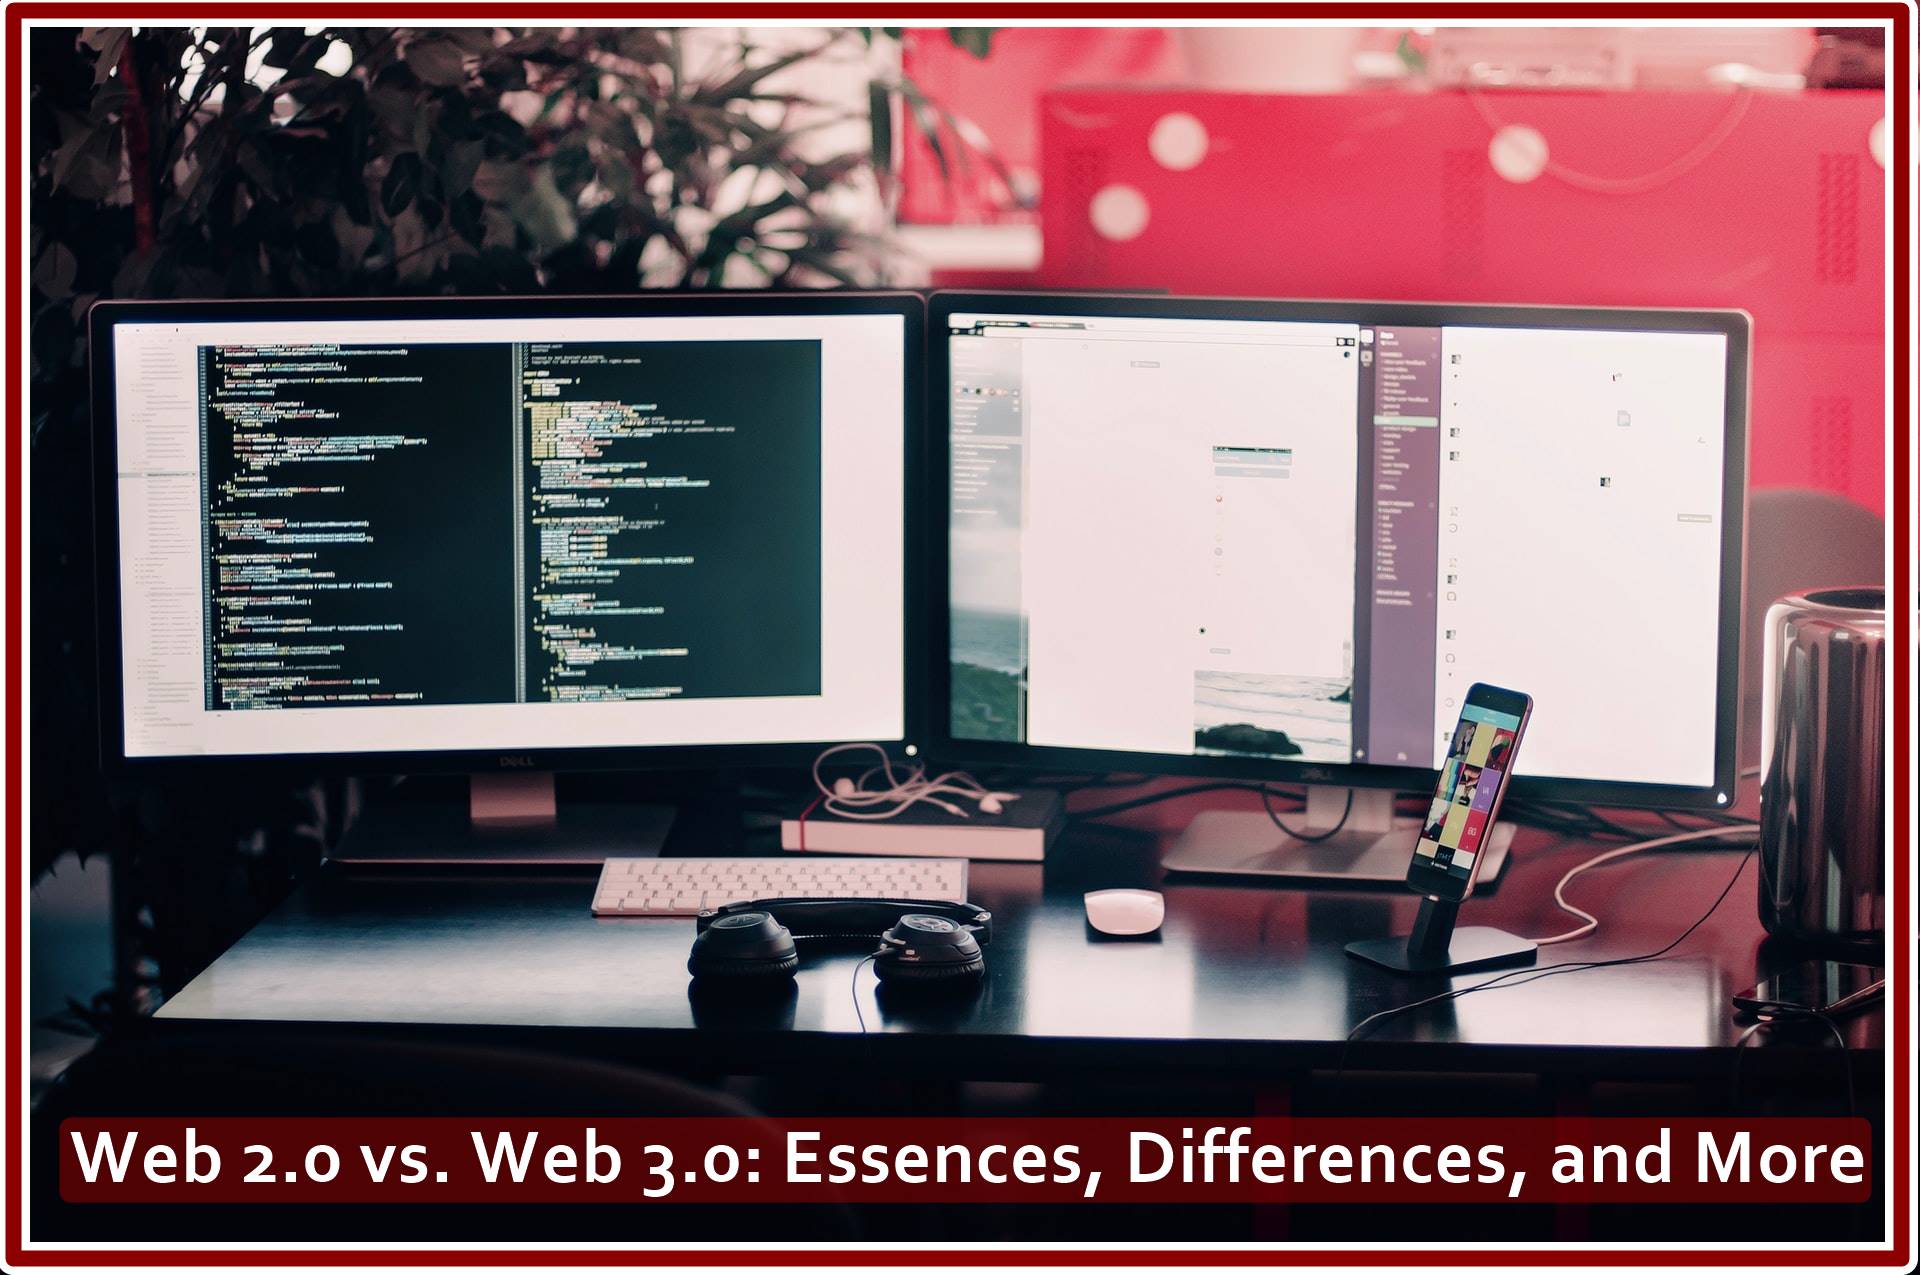 Web 2.0 and Web 3.0: What is The Difference Between Them?